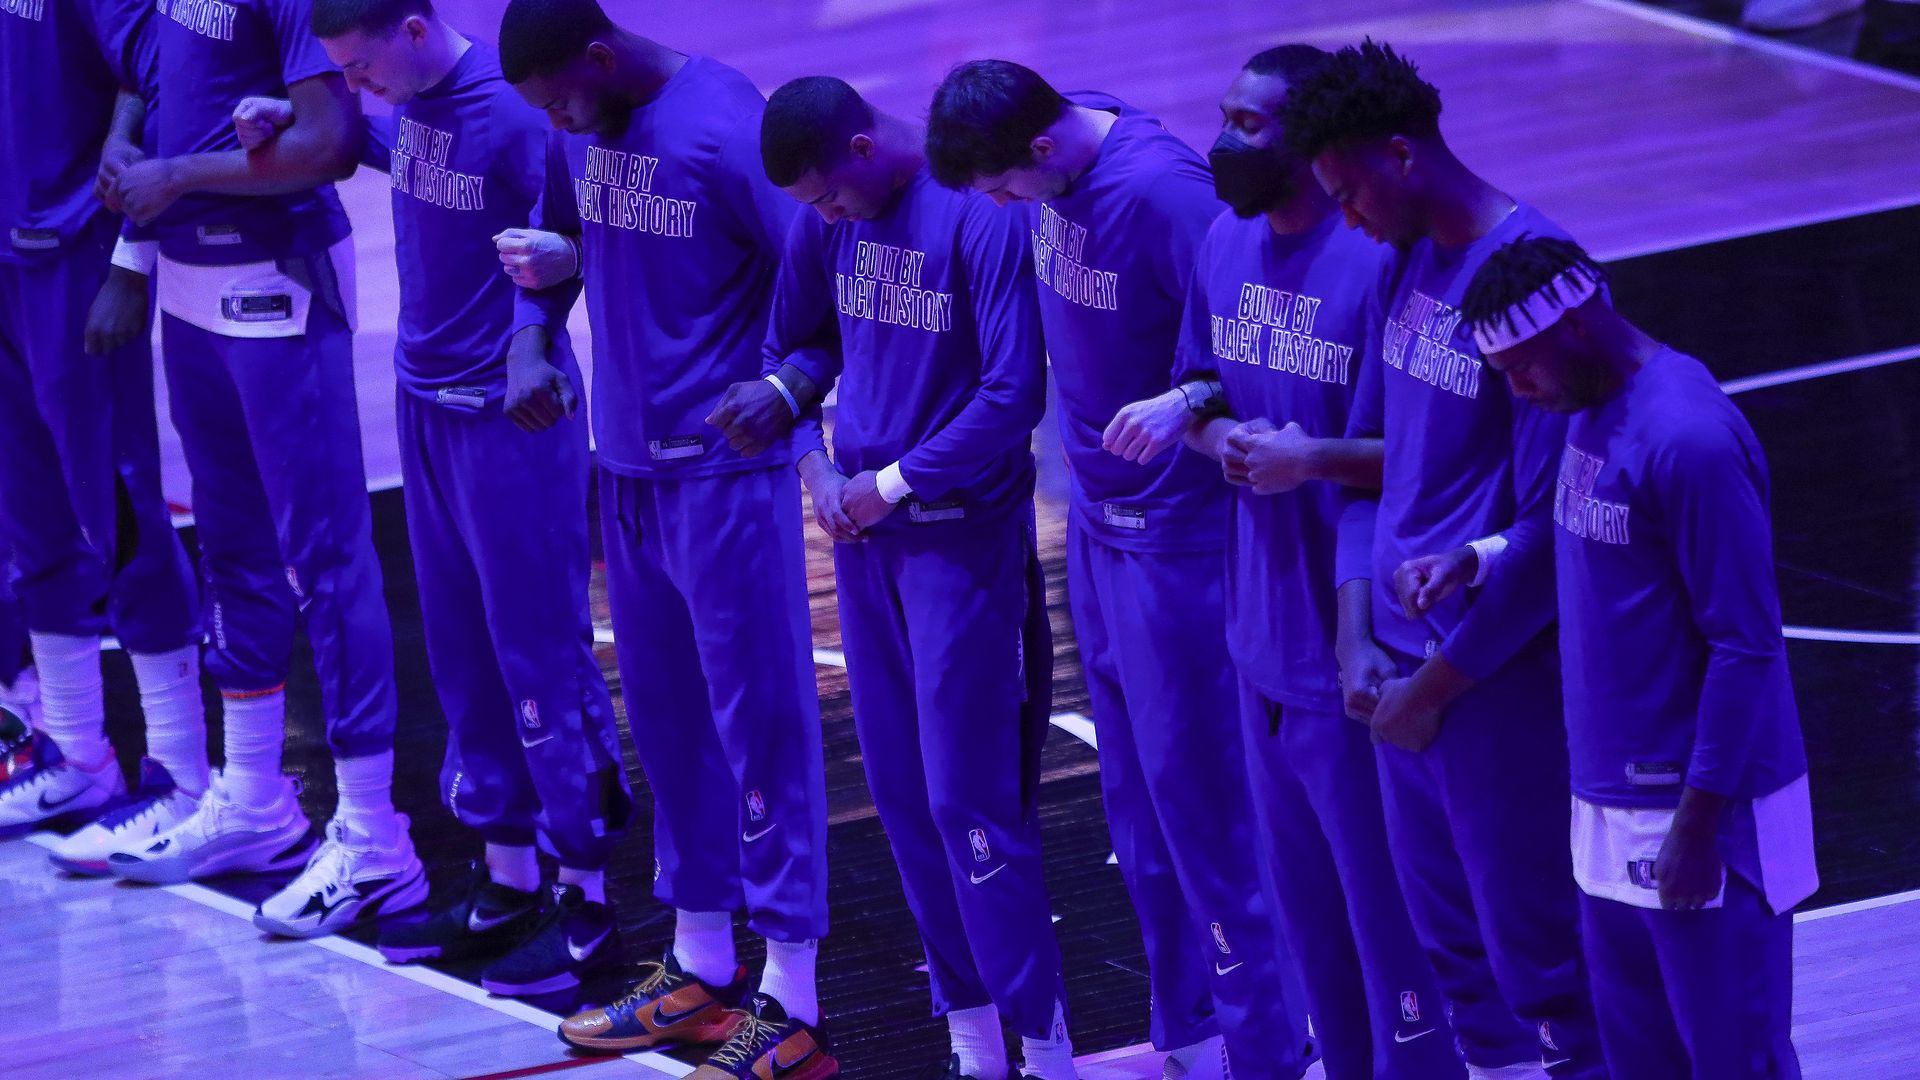  The Sacramento Kings linking arms during the national anthem in Los Angeles on Feb. 7.